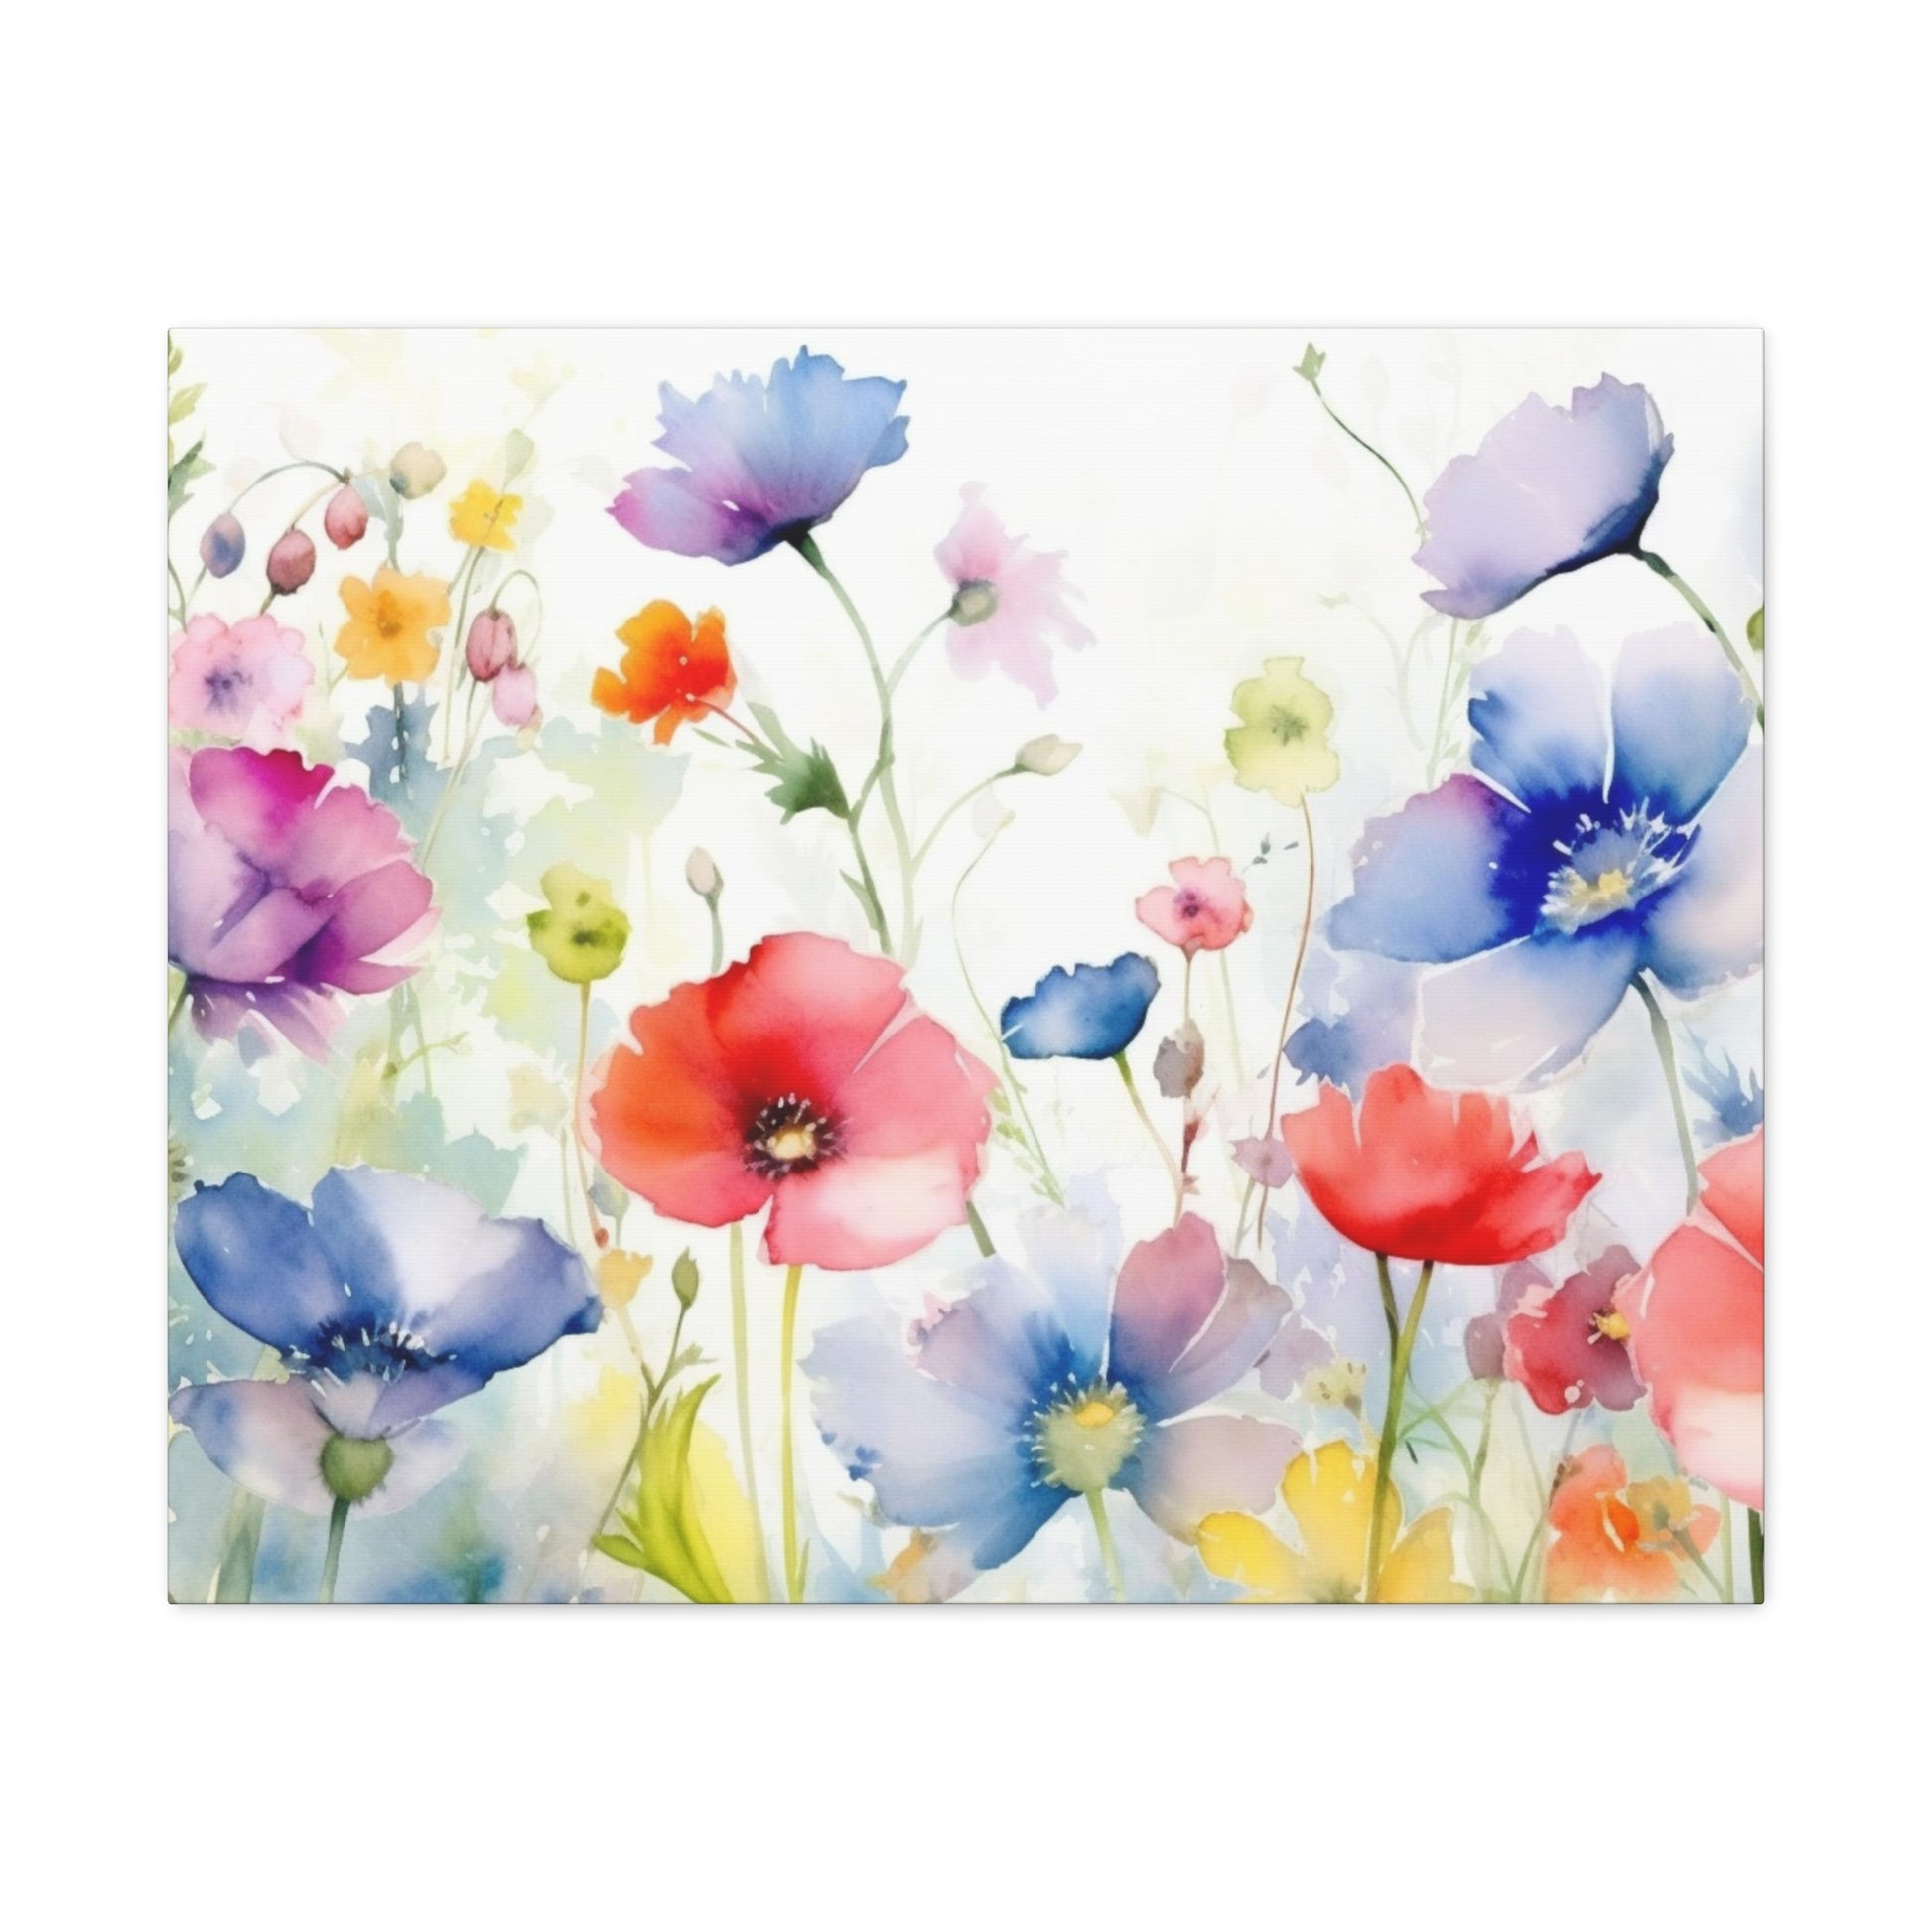 Wildflowers Canvas Gallery Wrap, Watercolor Floral Wall Art Print Decor Small Large Hanging Modern Landscape Living Room Starcove Fashion